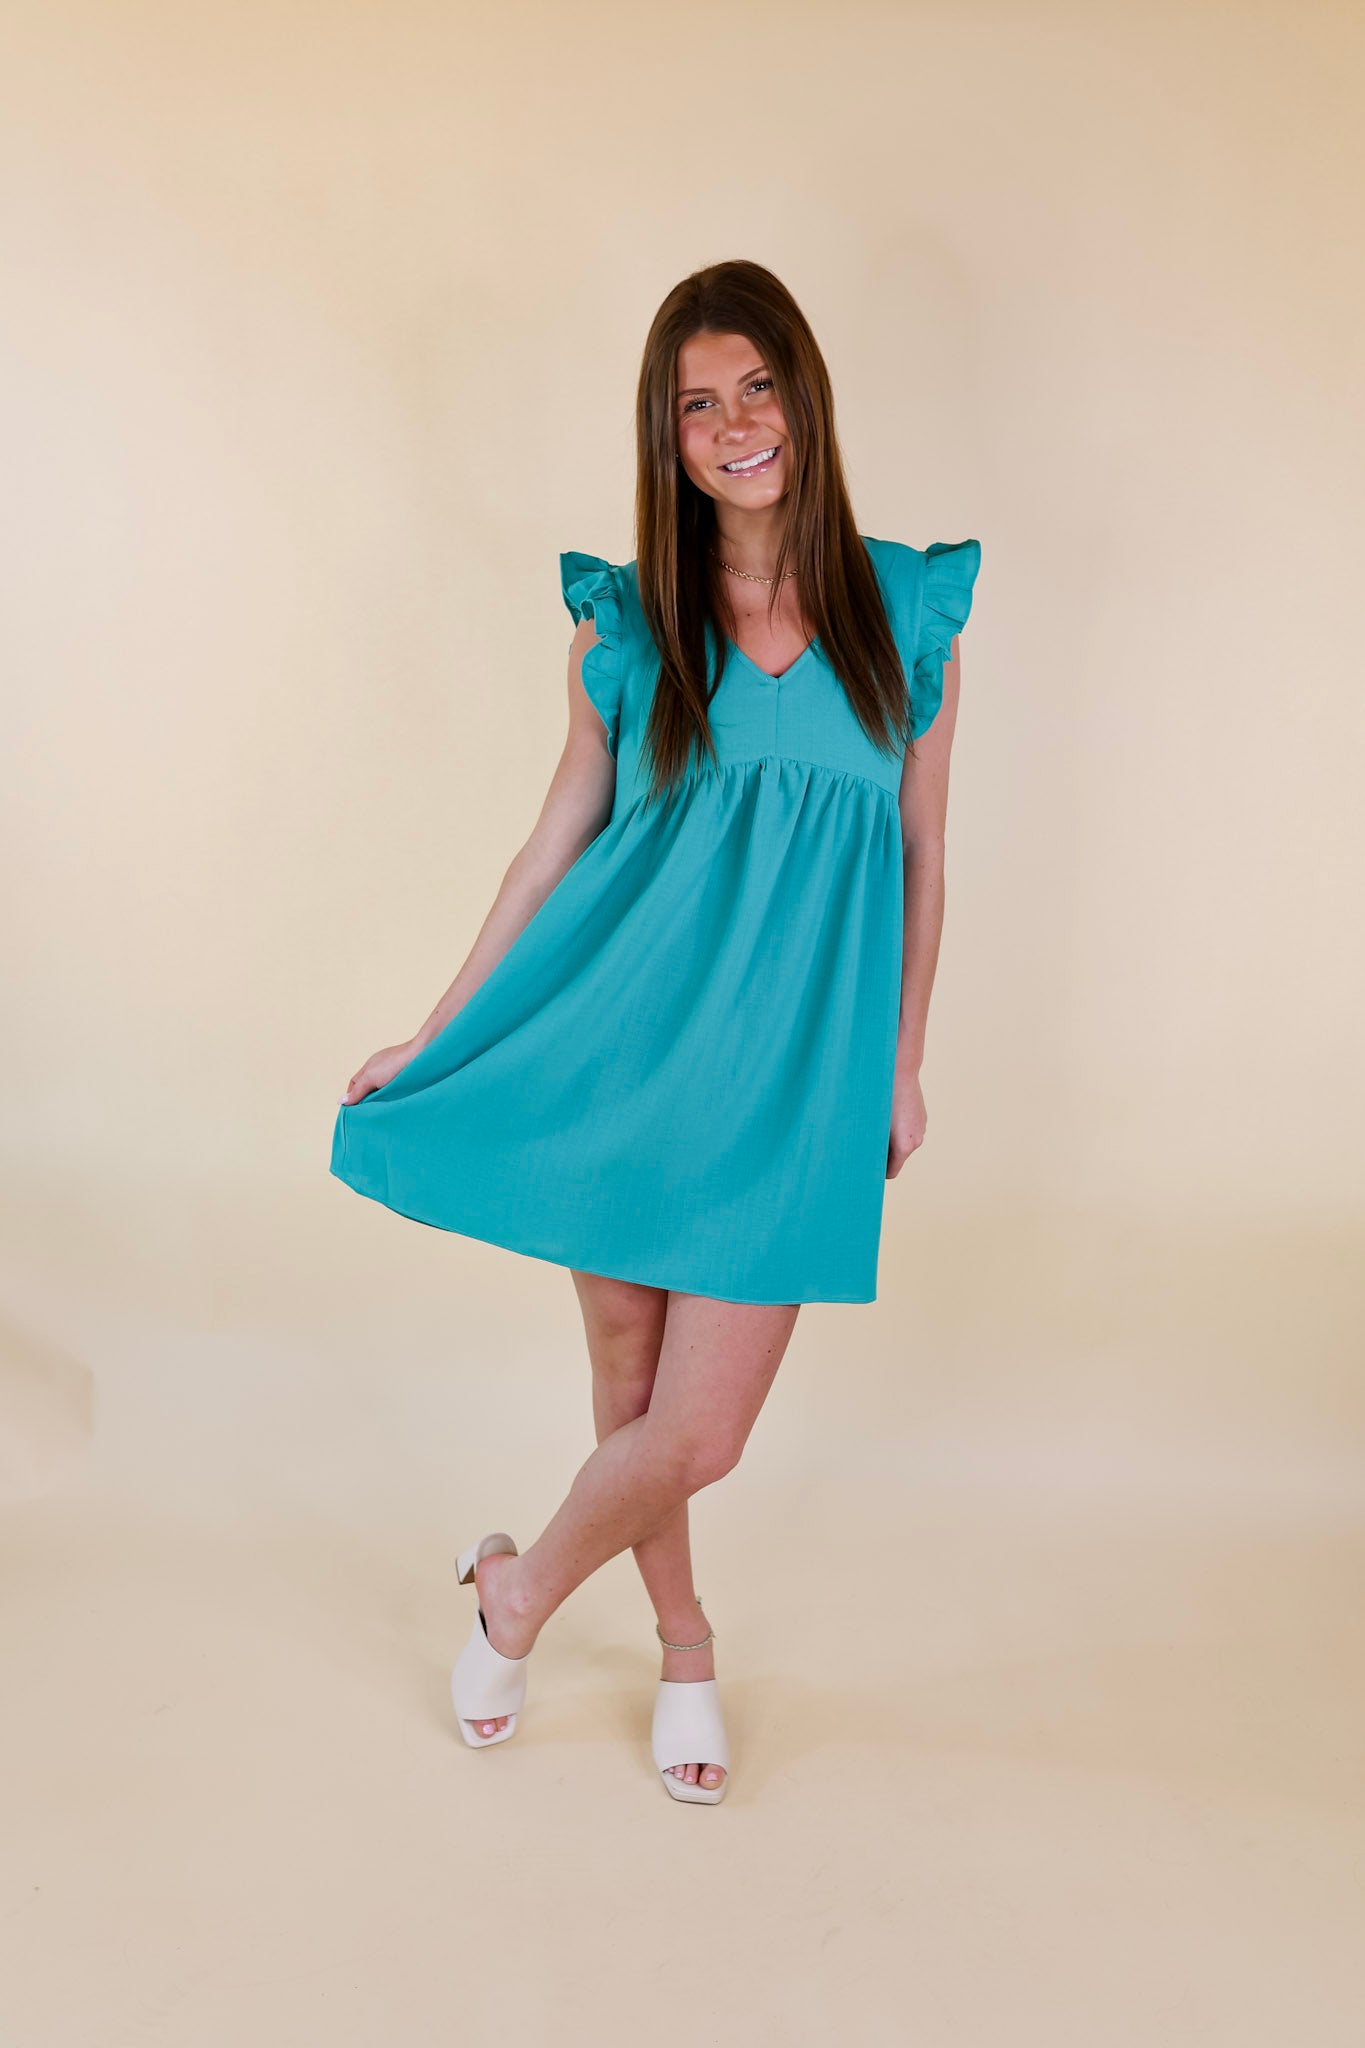 Capture Your Attention V Neck Dress with Ruffle Cap Sleeves in Turquoise - Giddy Up Glamour Boutique